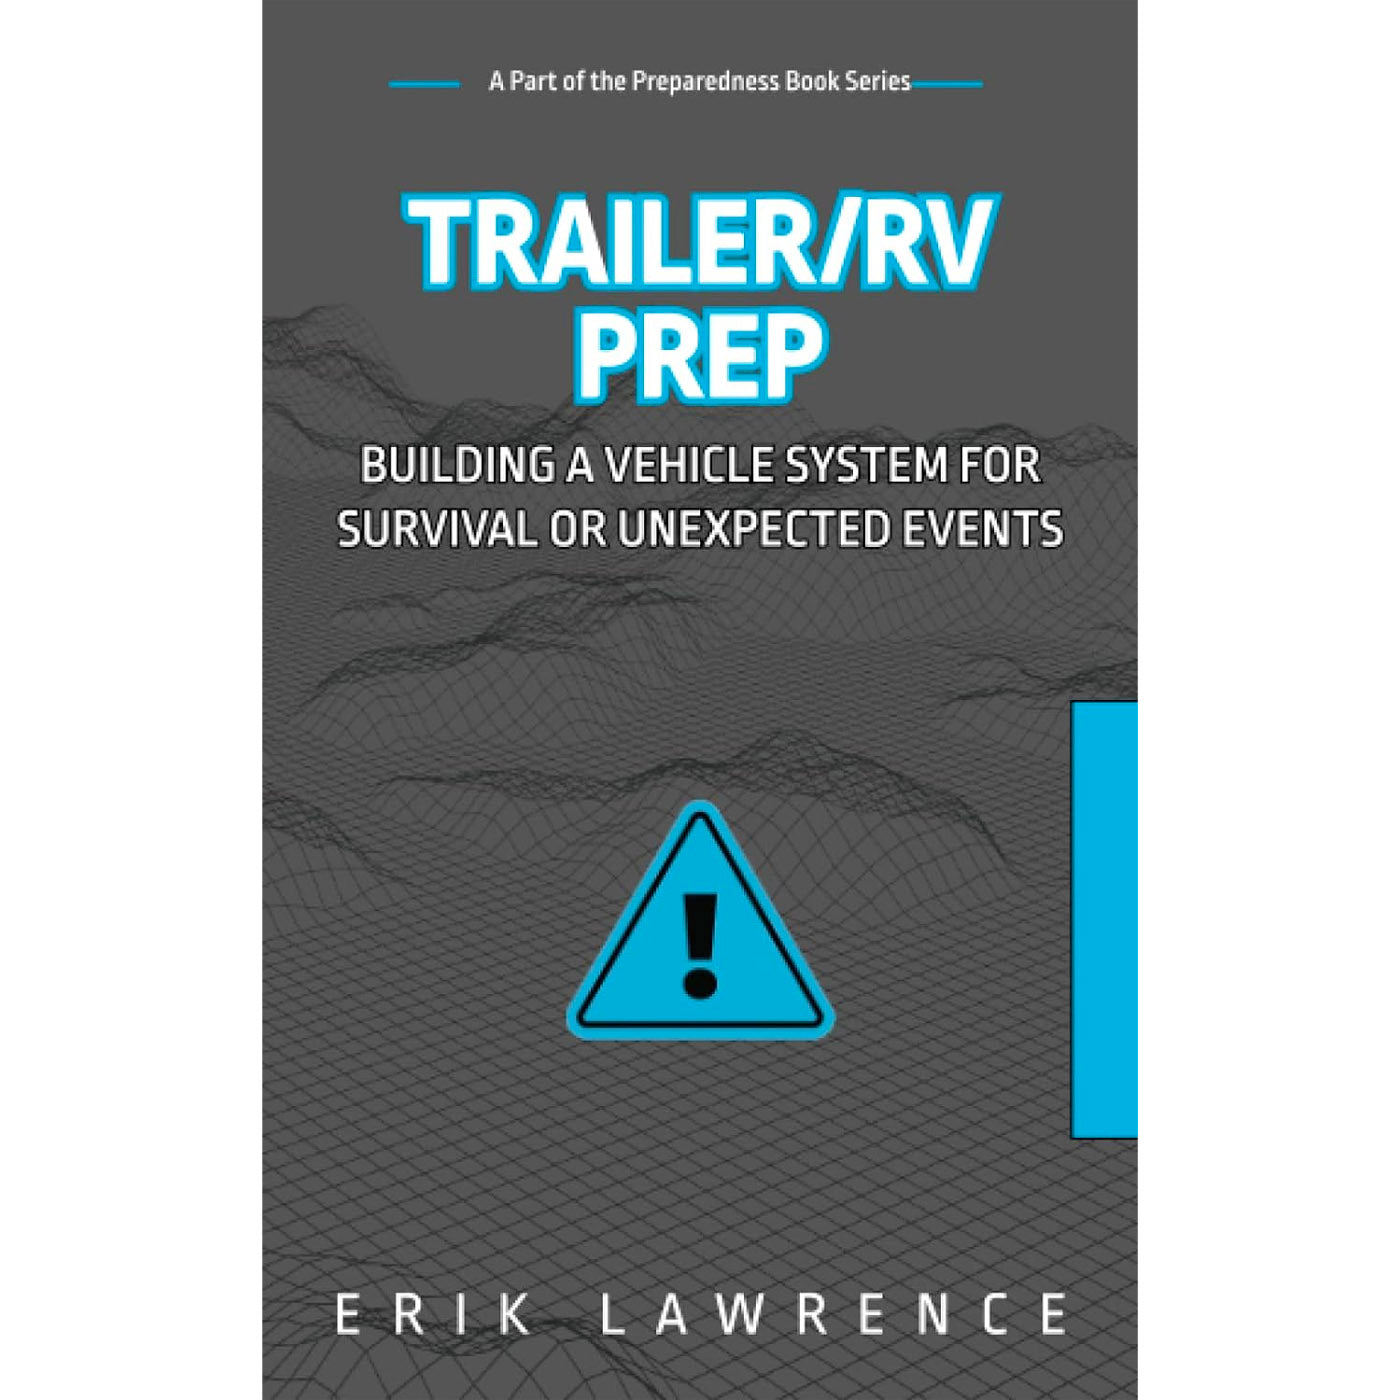 Trailer / RV Prep: Building a Vehicle System for Survival or Unexpected Events